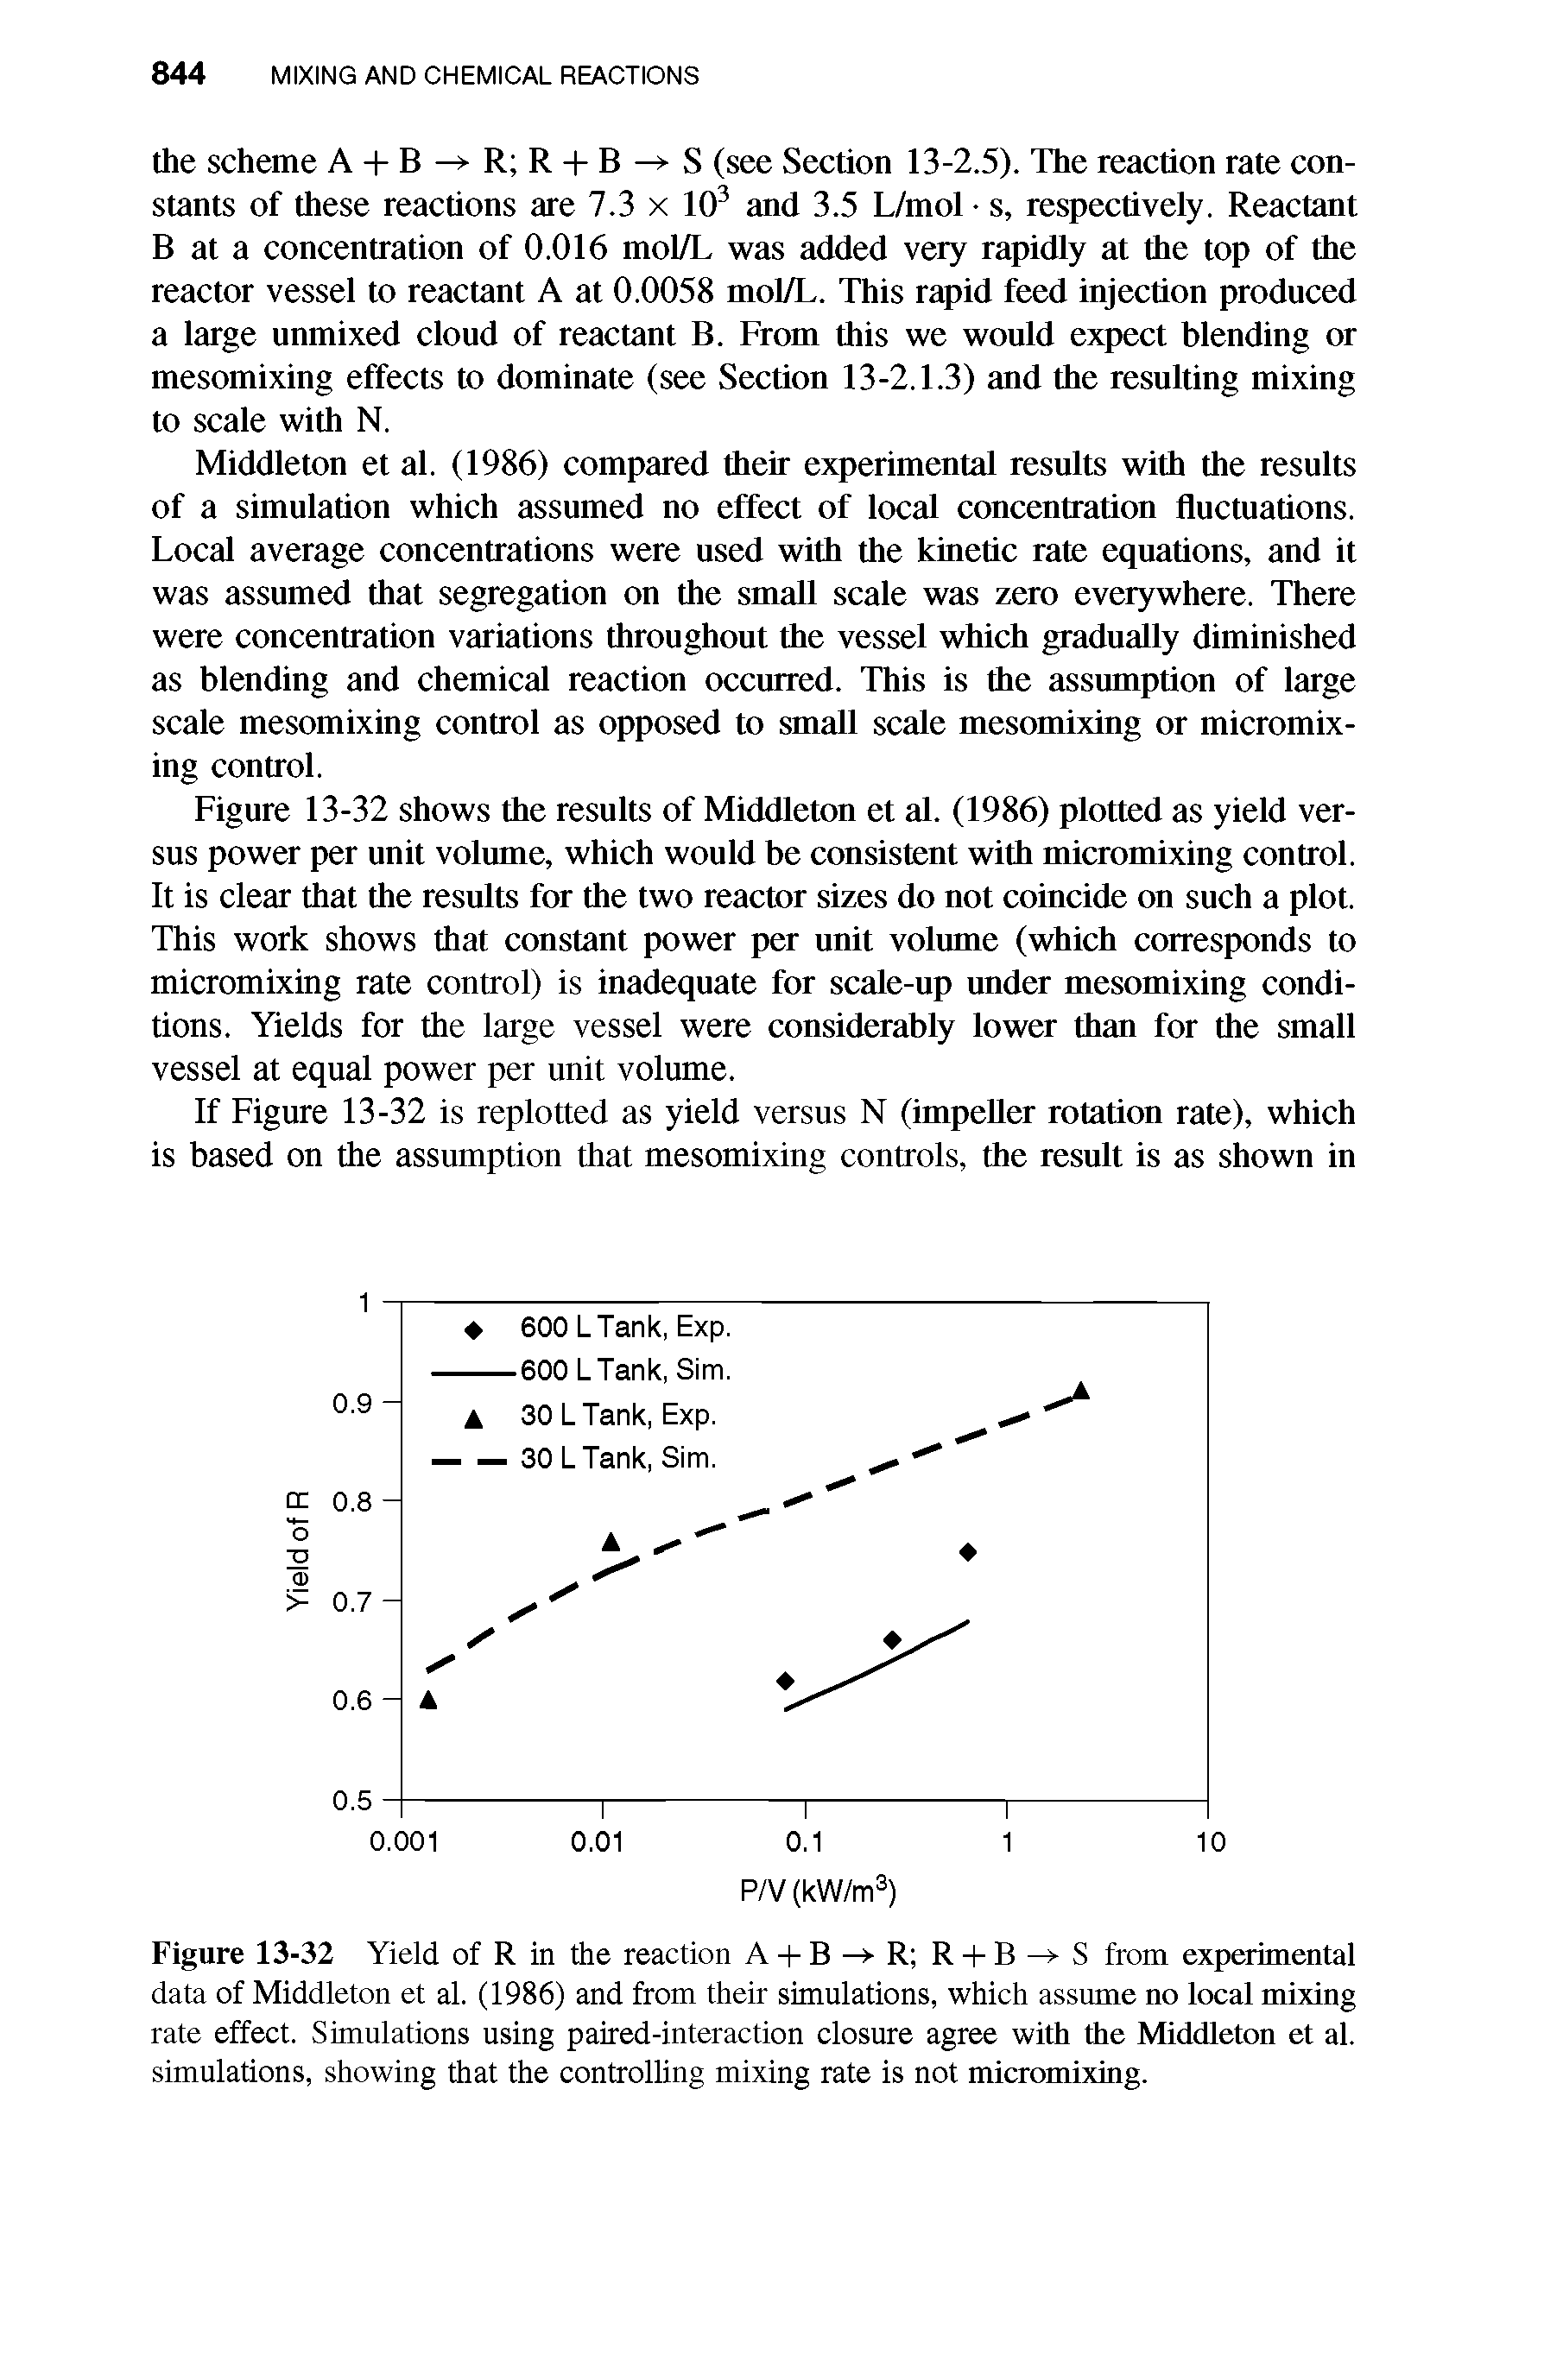 Figure 13-32 Yield of R in the reaction A- -B R R- -B S from experimental data of Middleton et al. (1986) and from their simulations, which assume no local mixing rate effect. Simulations using paired-interaction closure agree with the Middleton et al. simulations, showing that the controlling mixing rate is not micromixing.